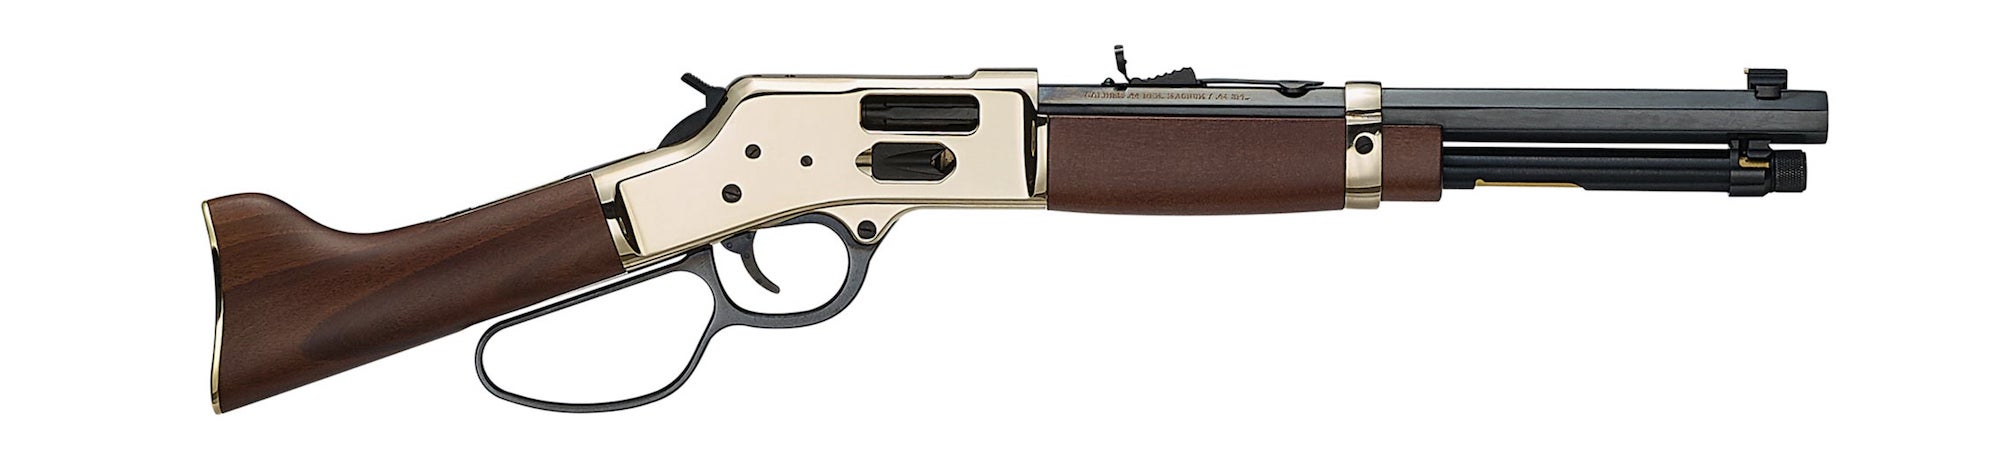 photo of a Henry Mares Ear lever-action